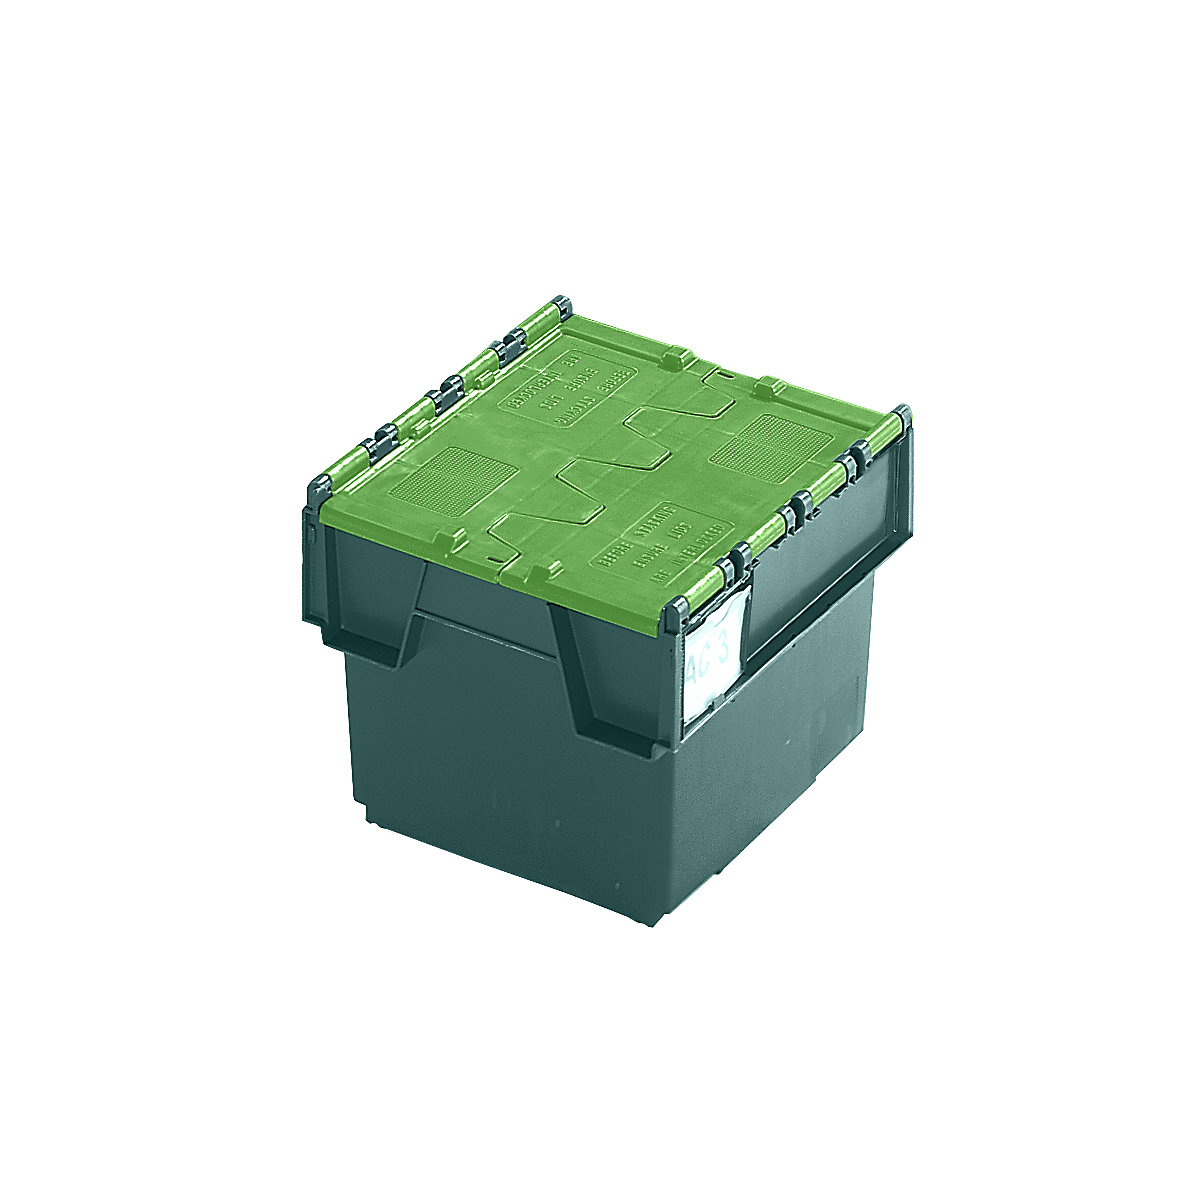 KAIMAN reusable stacking container, capacity 25 litres, LxWxH 400 x 300 x 320 mm, green